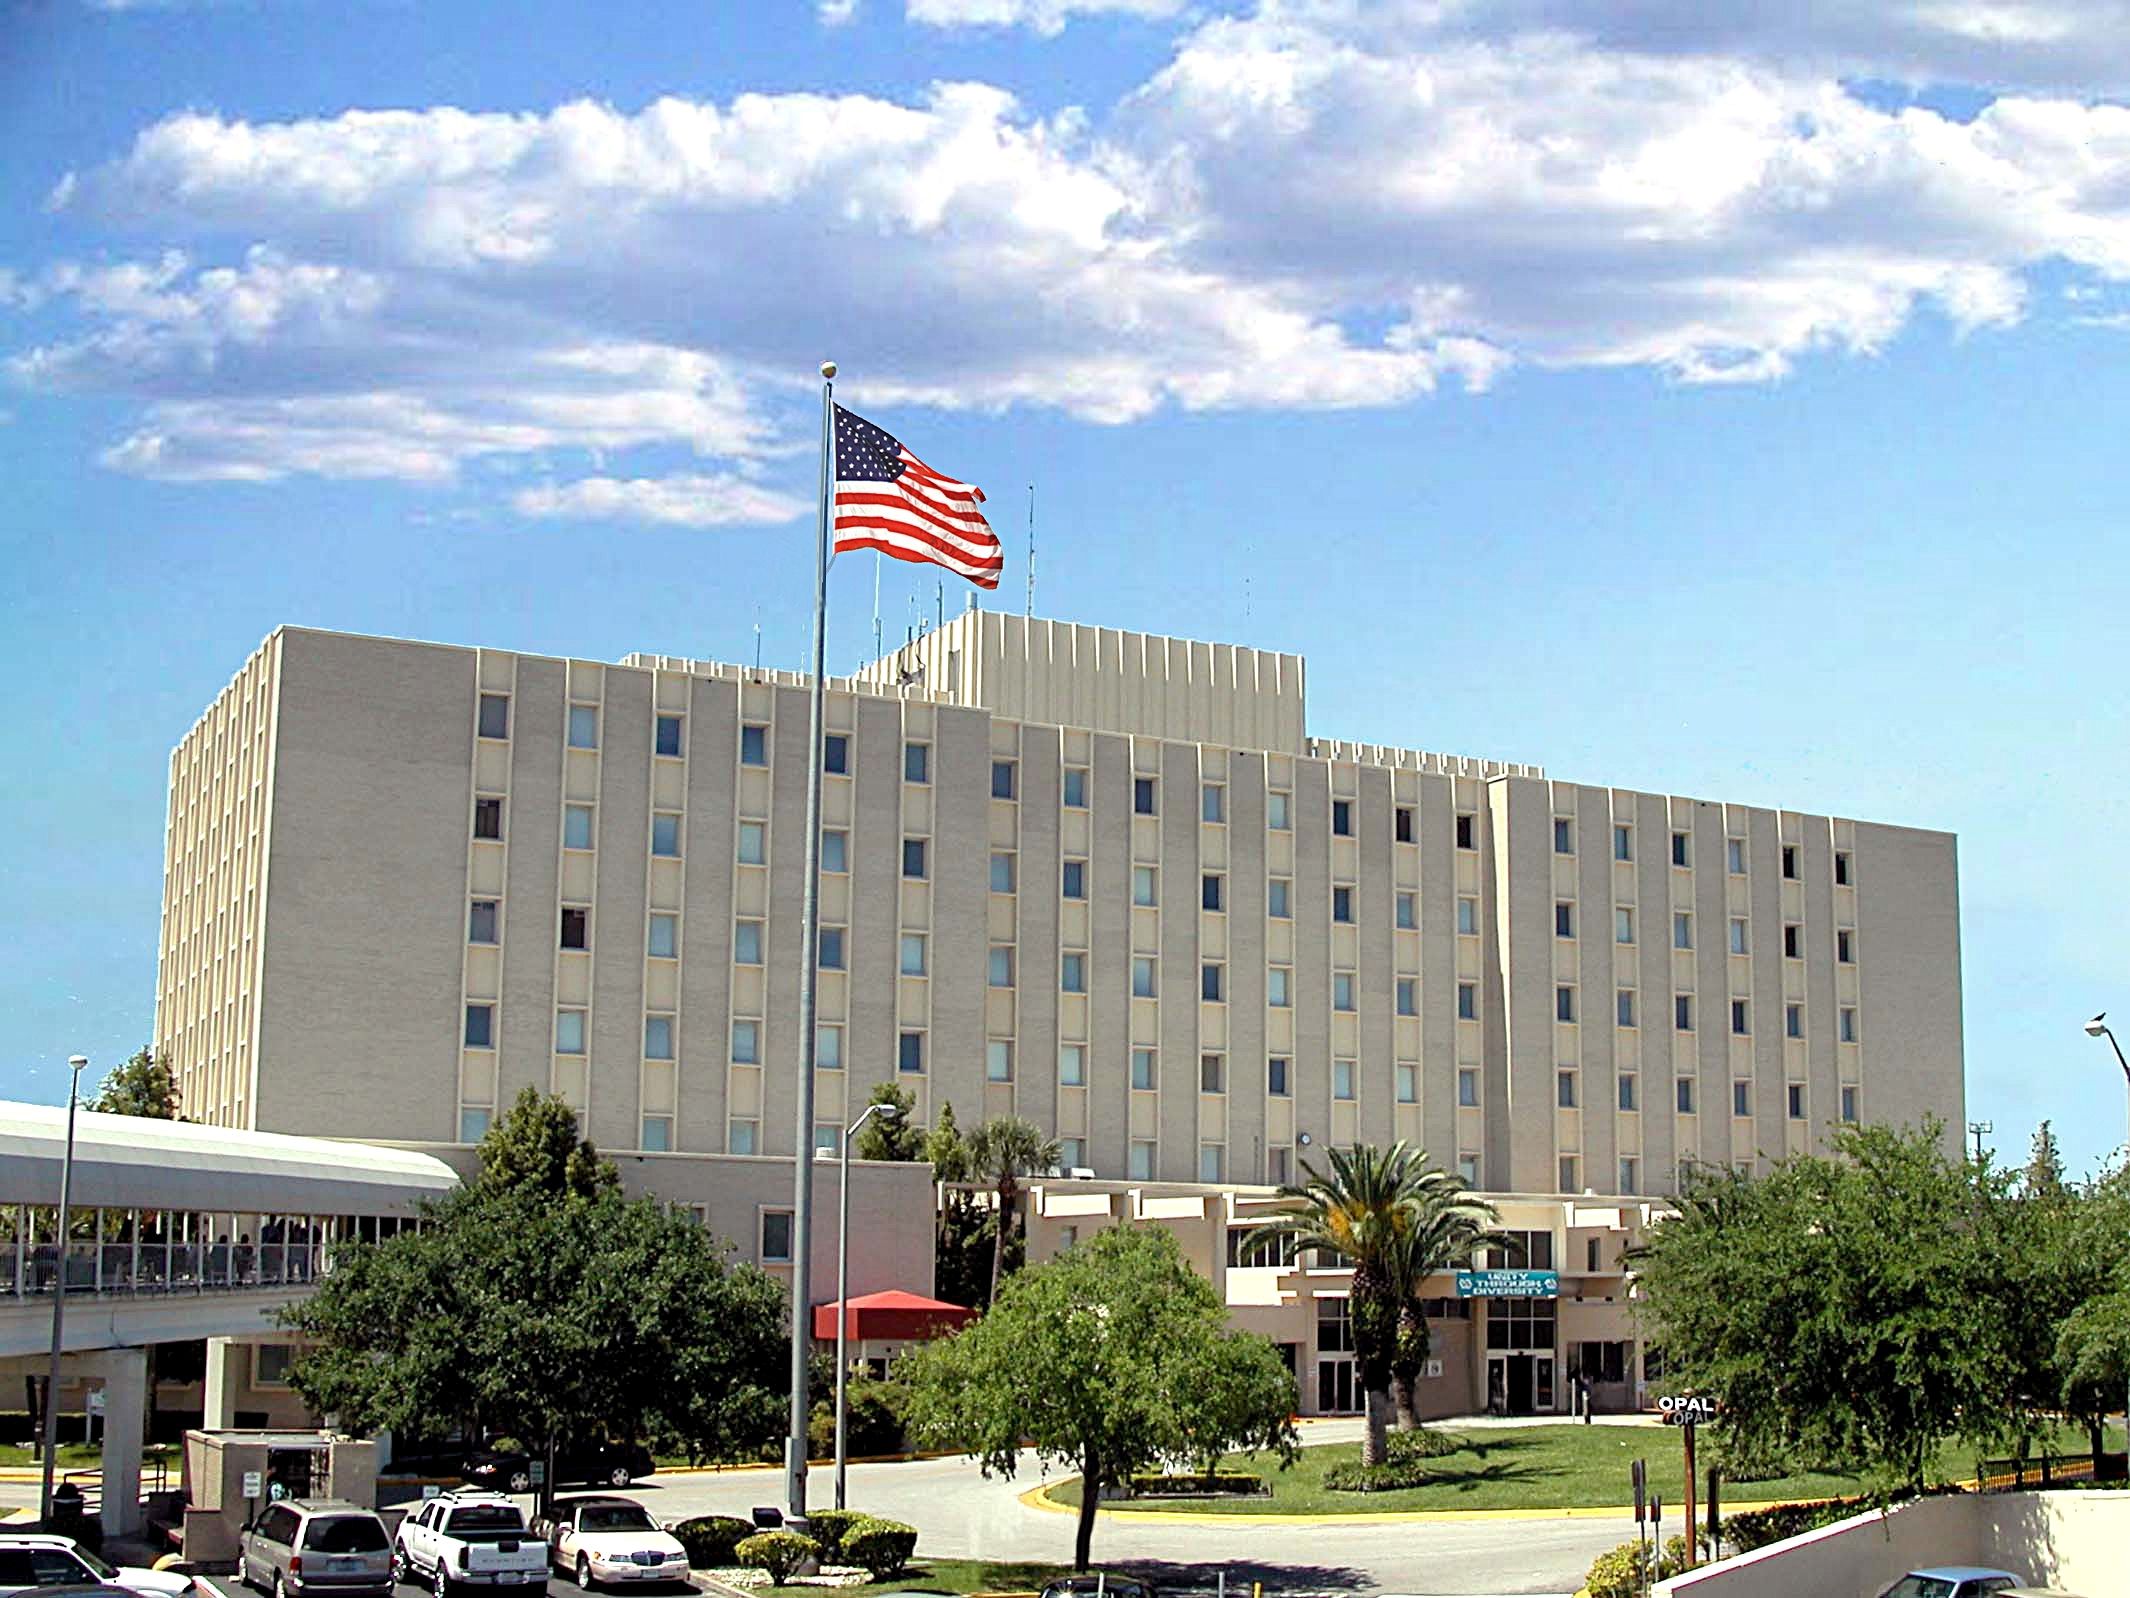 american flag with JAHVH hospital building in the background and clouds overhead in the daytime